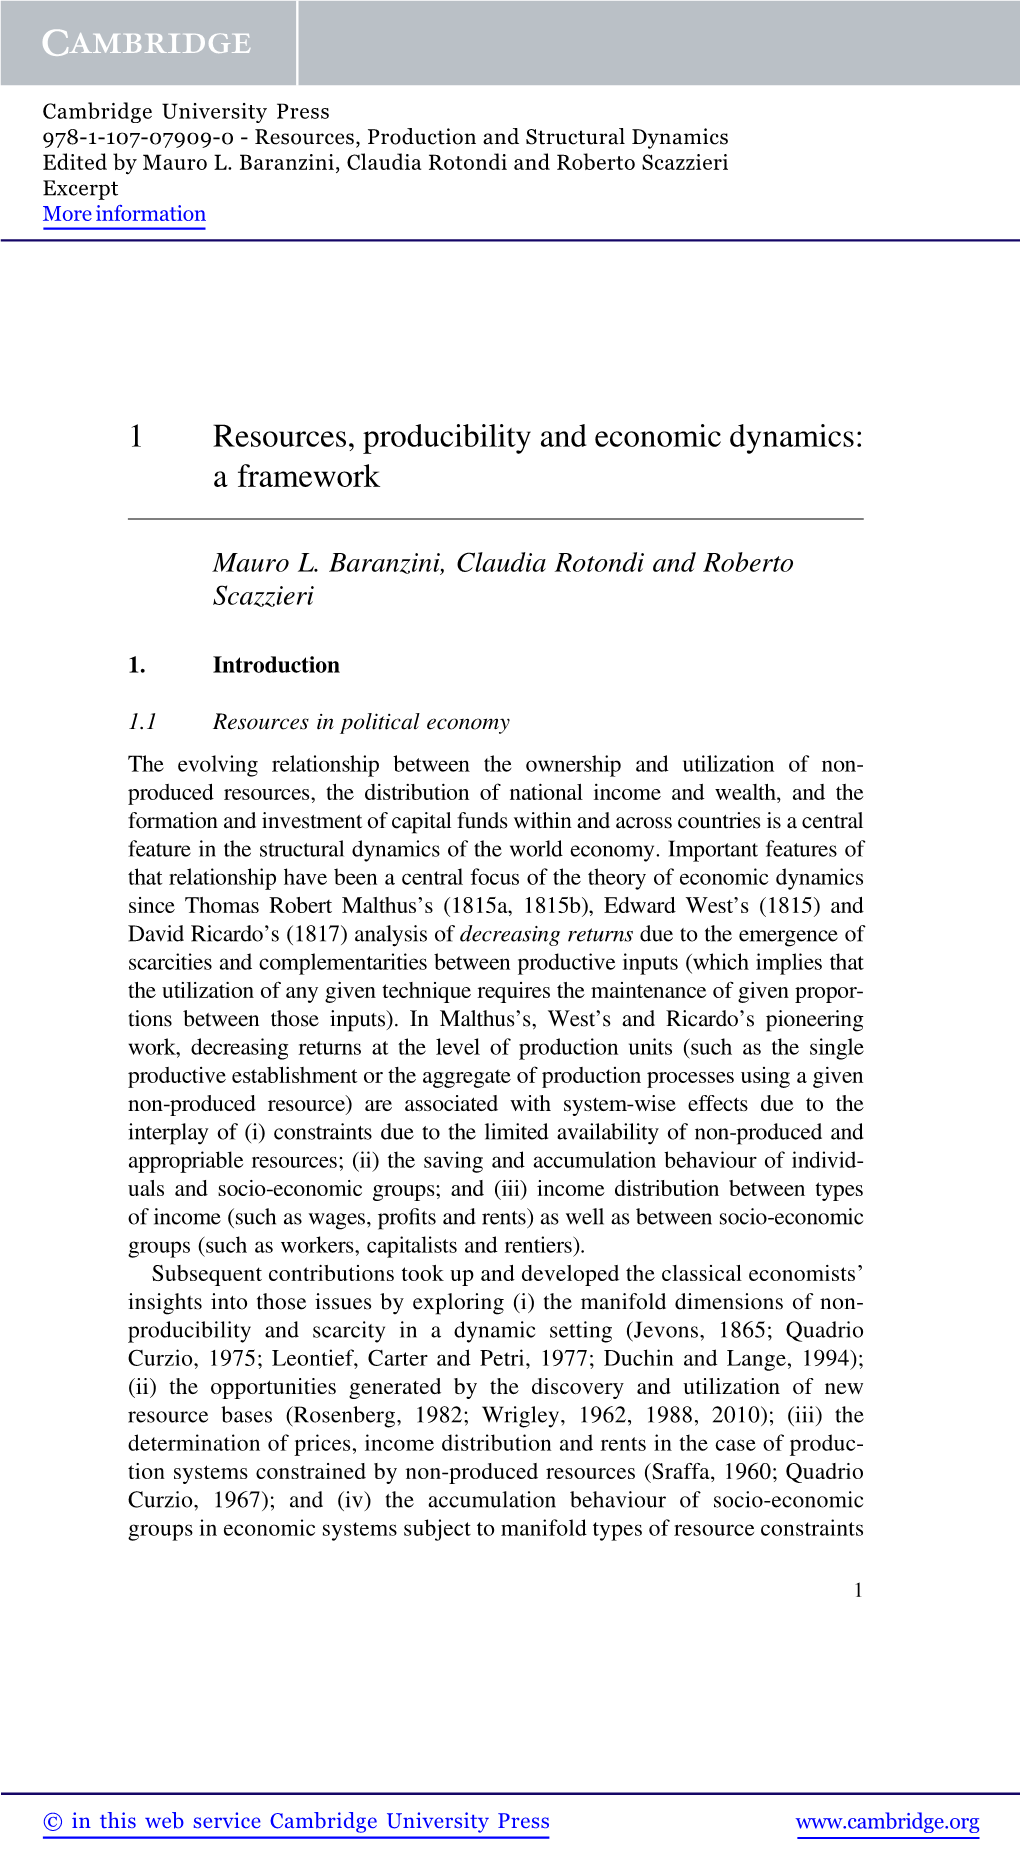 1 Resources, Producibility and Economic Dynamics: a Framework